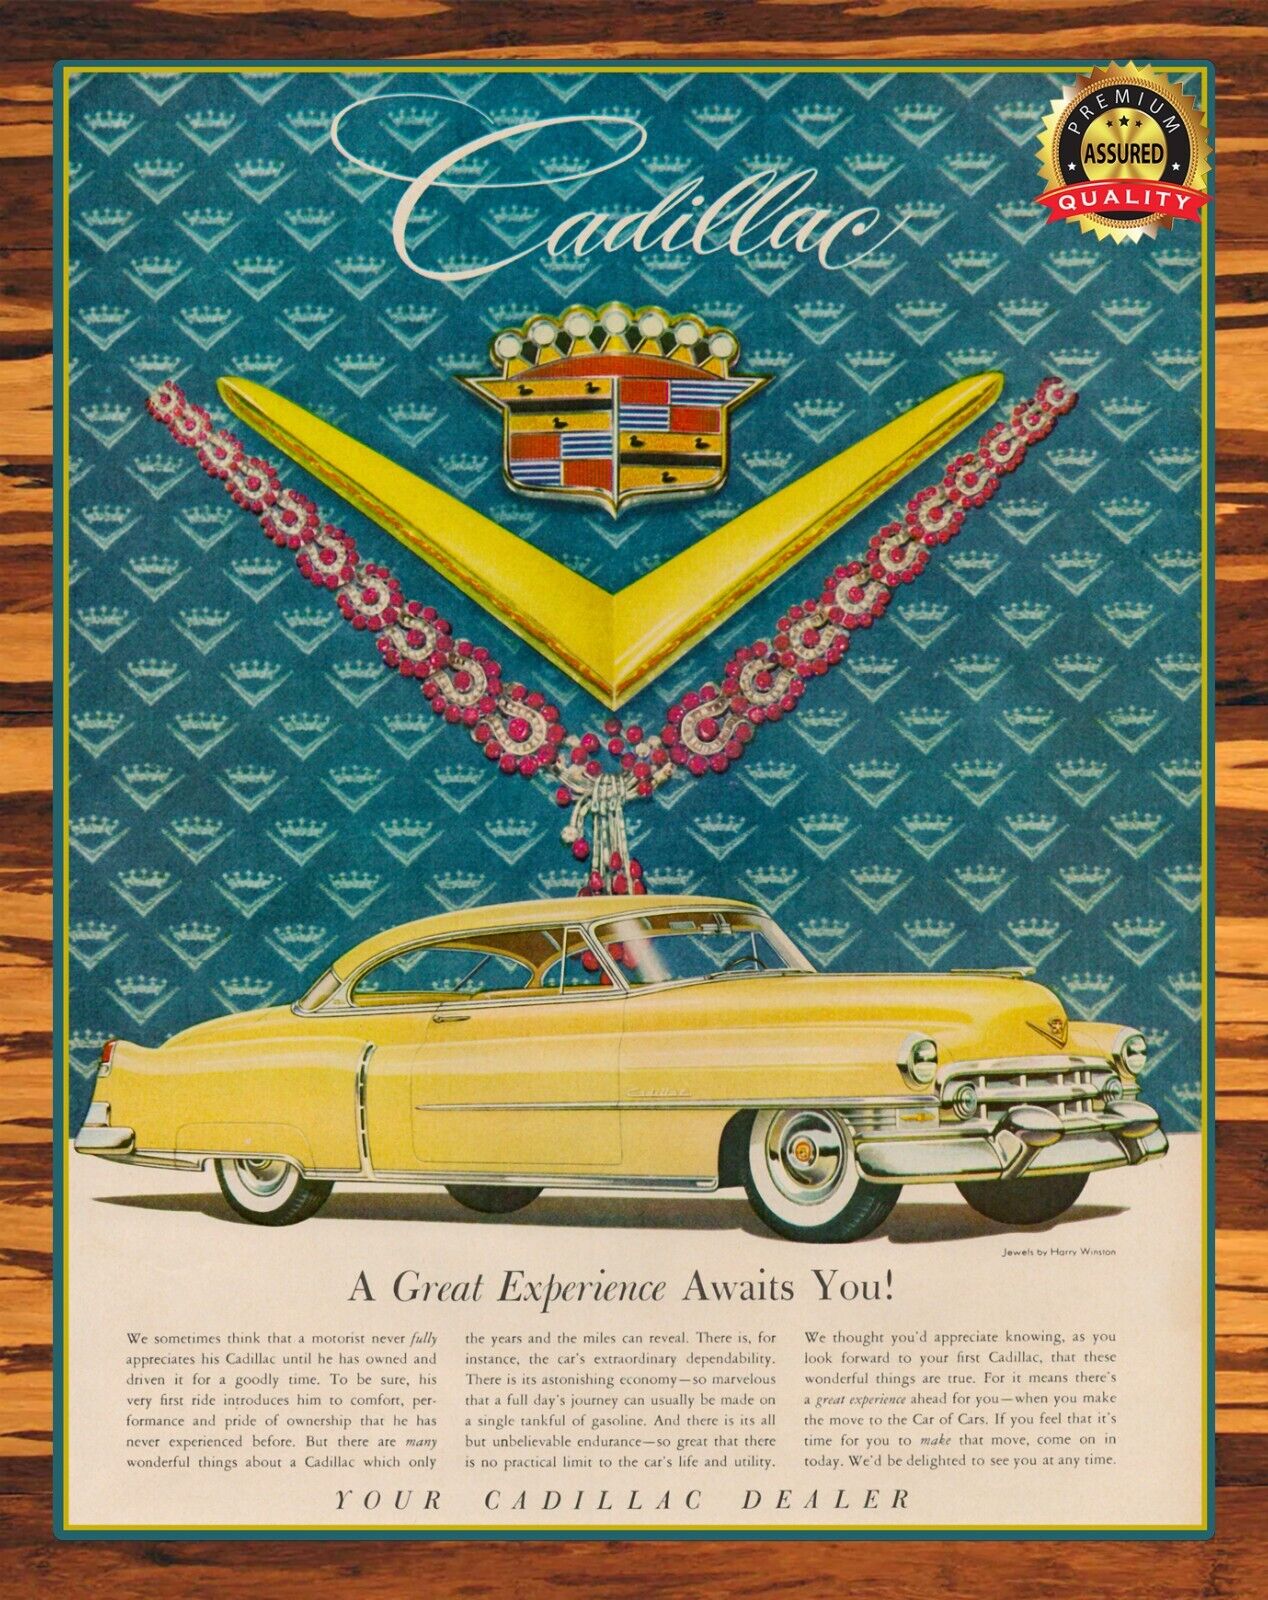 Cadillac - A Great Experience Awaits You - 1950 - Restored - Metal Sign 11 x 14